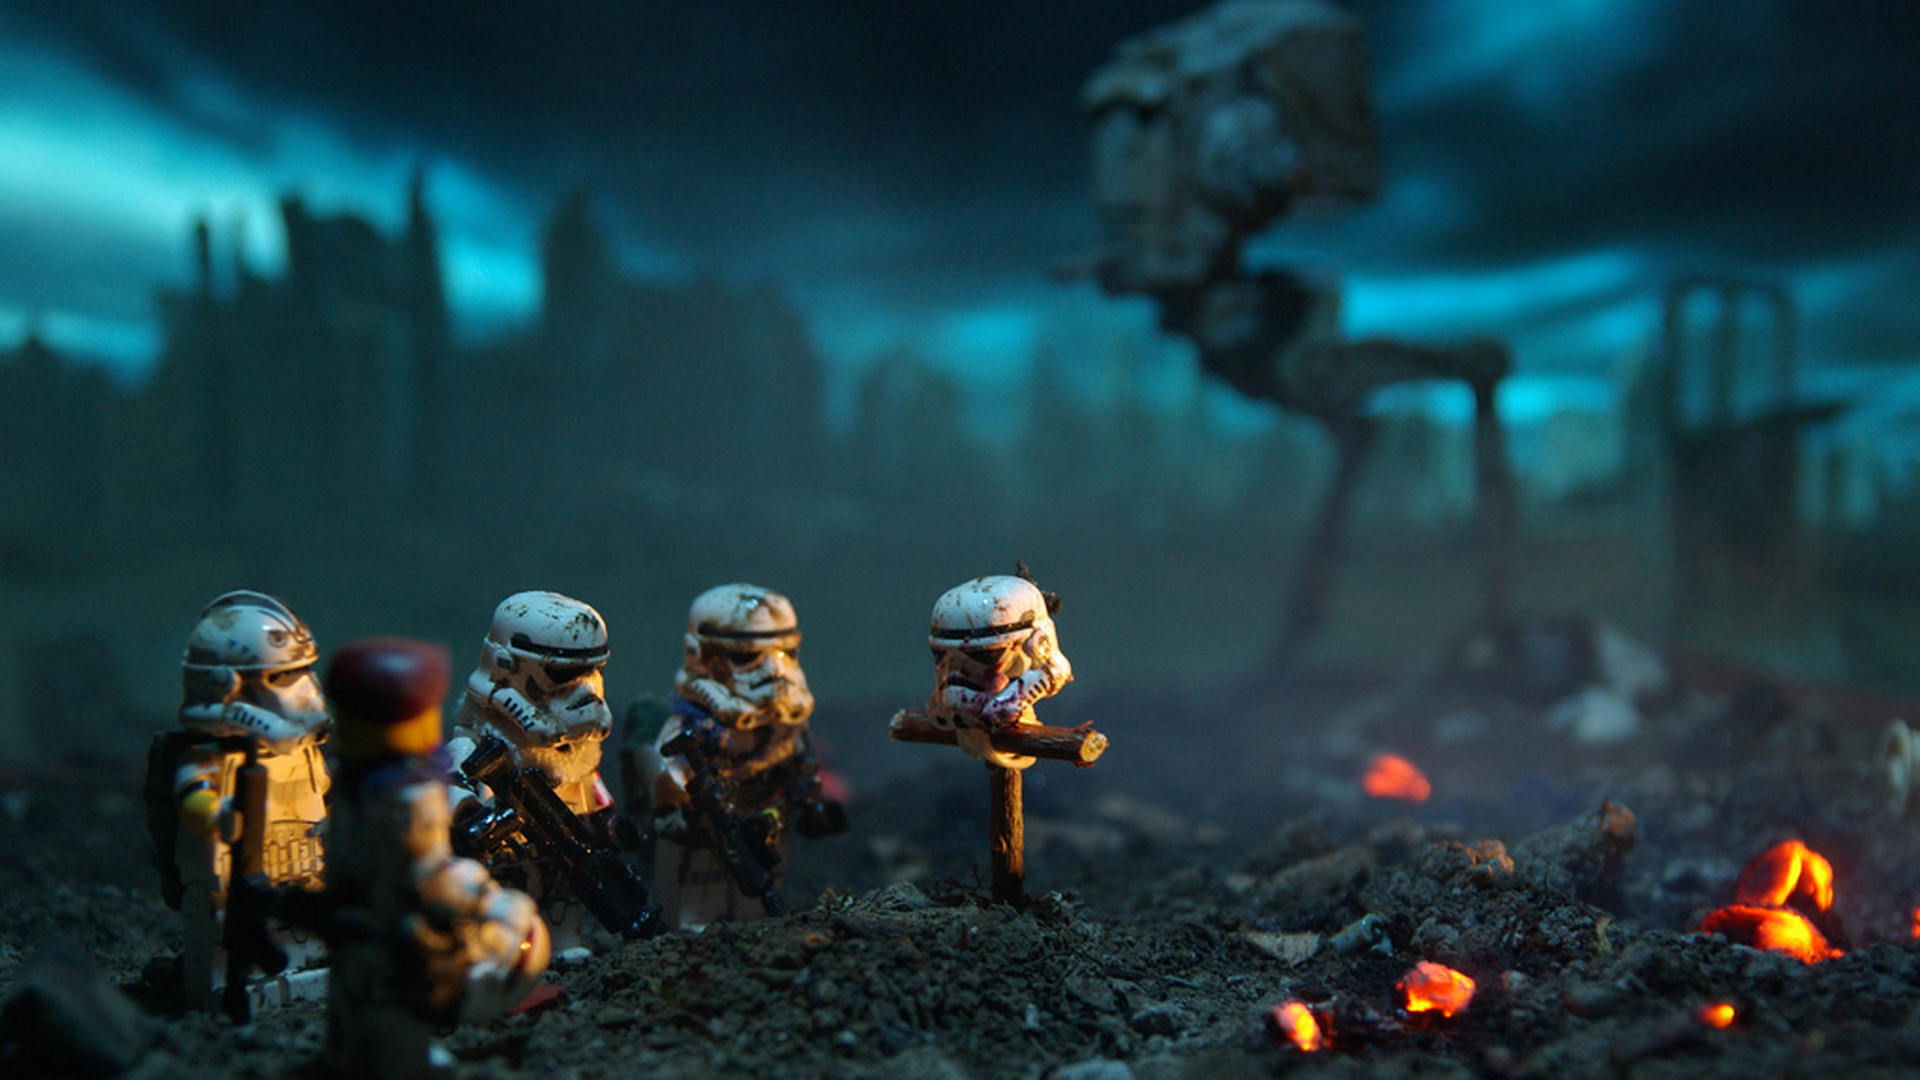 1920x1080 Lego Star Wars Stormtroopers